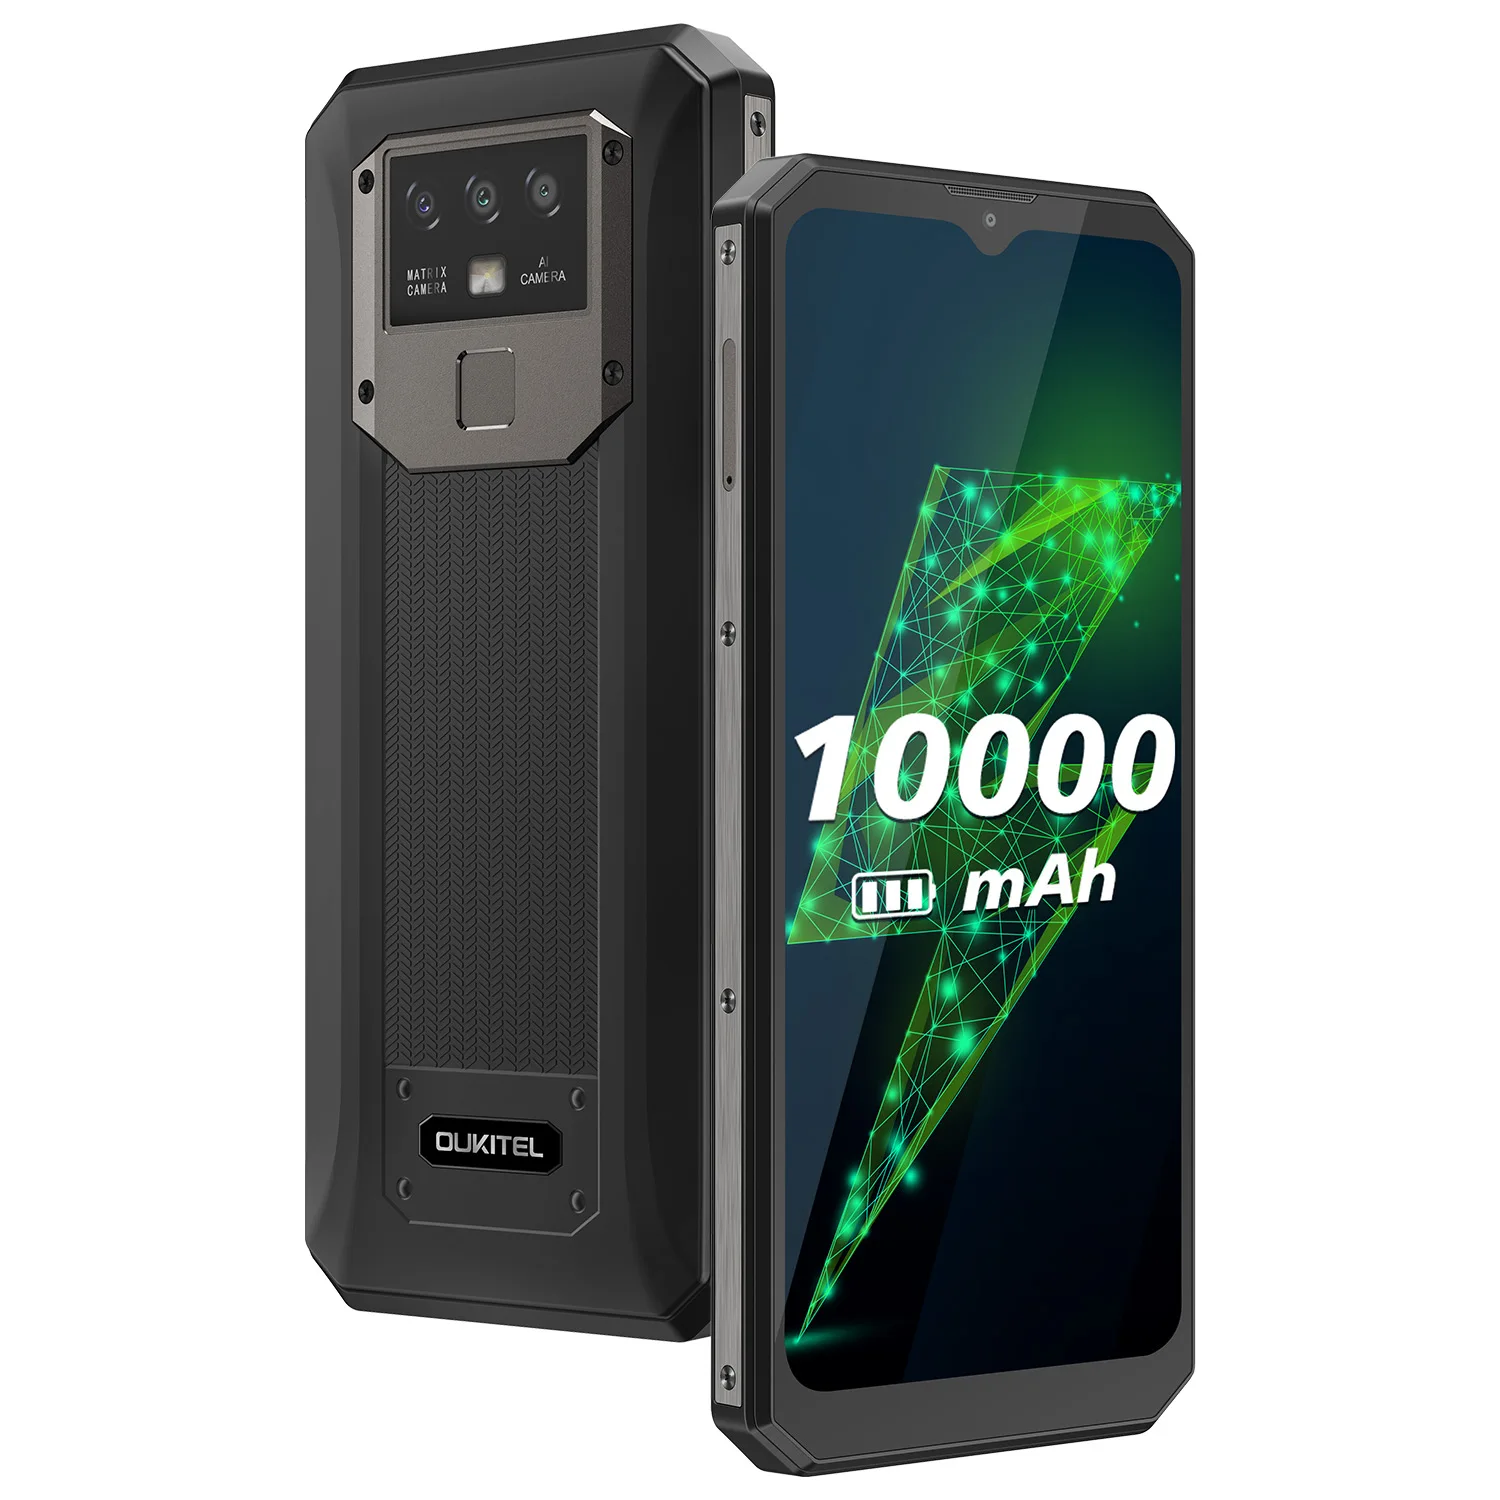 

2021 NEW OUKITEL K15 Plus 10000mAh NFC Rugged Phone 6.52" 3GB RAM 32GB ROM Smartphone Quad Core Android 10.0 Cell Mobile Phone